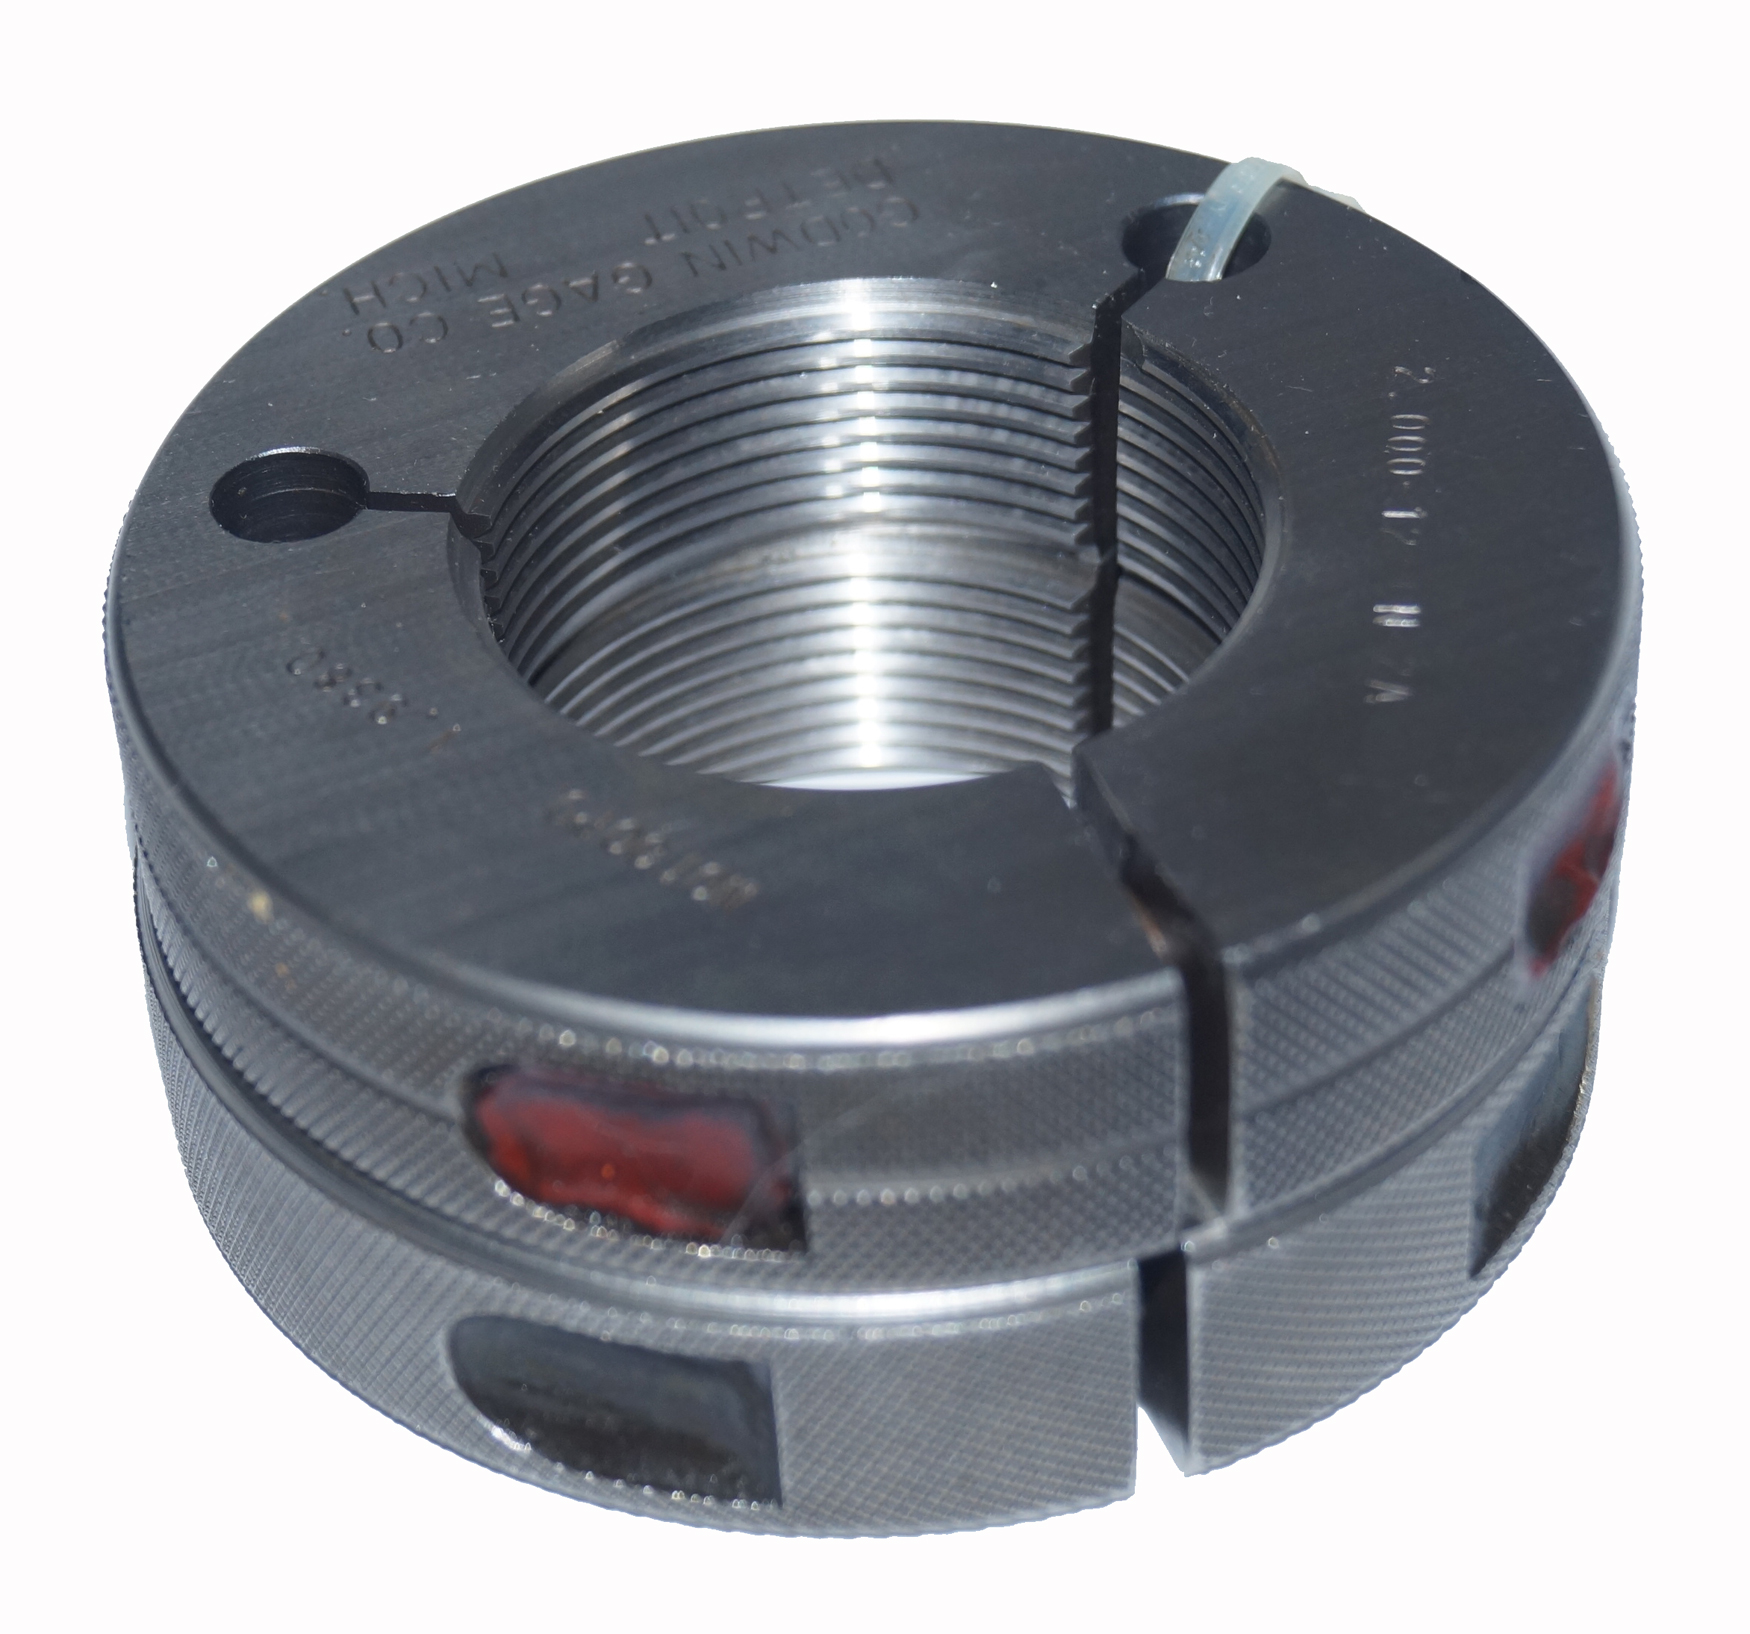 2 1/2-12 UN Thread Ring Gage 2A GO NOGO 100% Calibrated ship by Fedex Delivery in 4 days